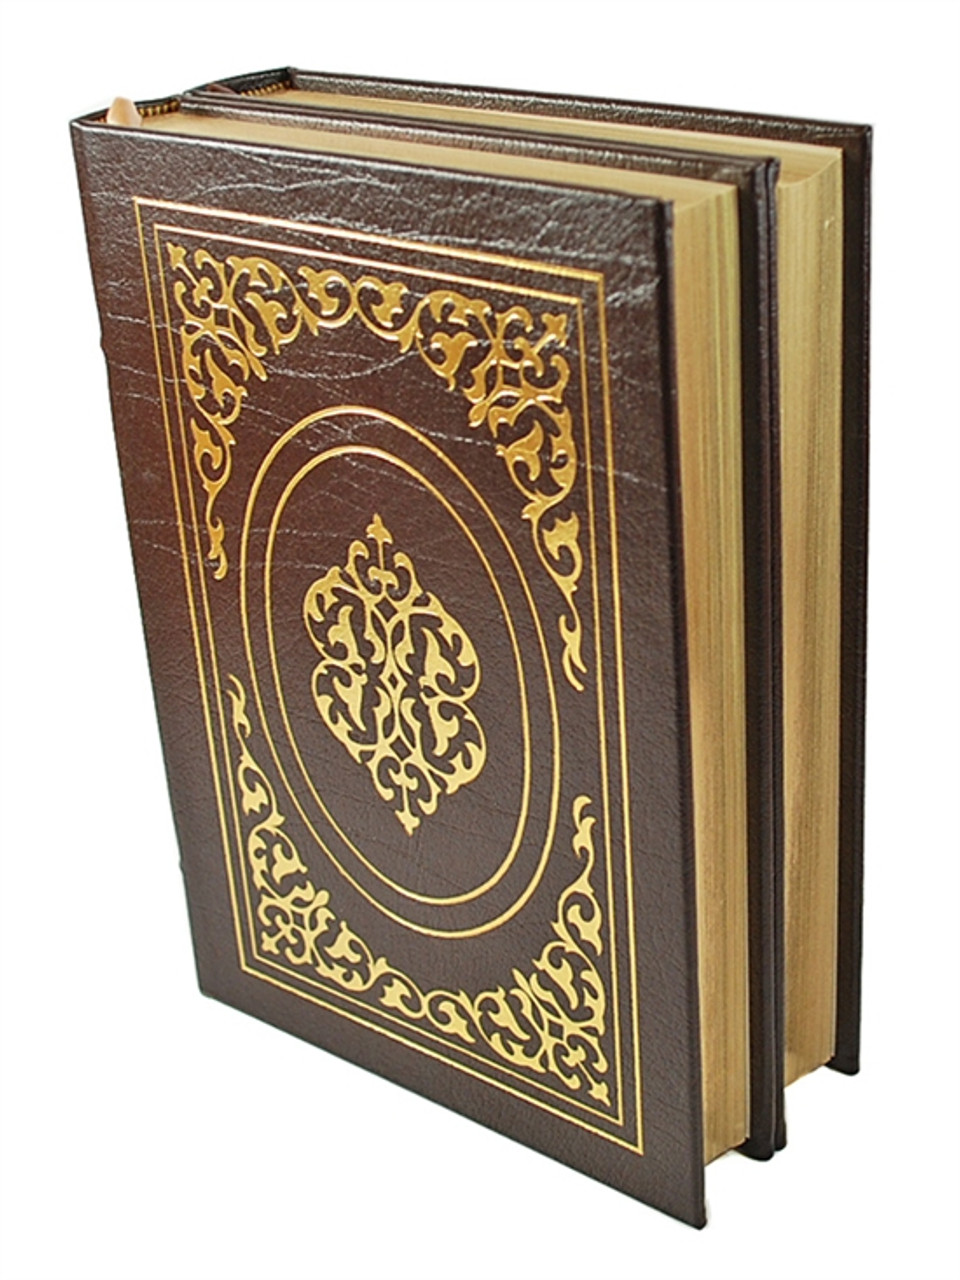 Easton Press, Lewis and Clark "The Journals of the Expedition" Limited Leather Bound Collector's Set, 2 Vols [Very Fine]